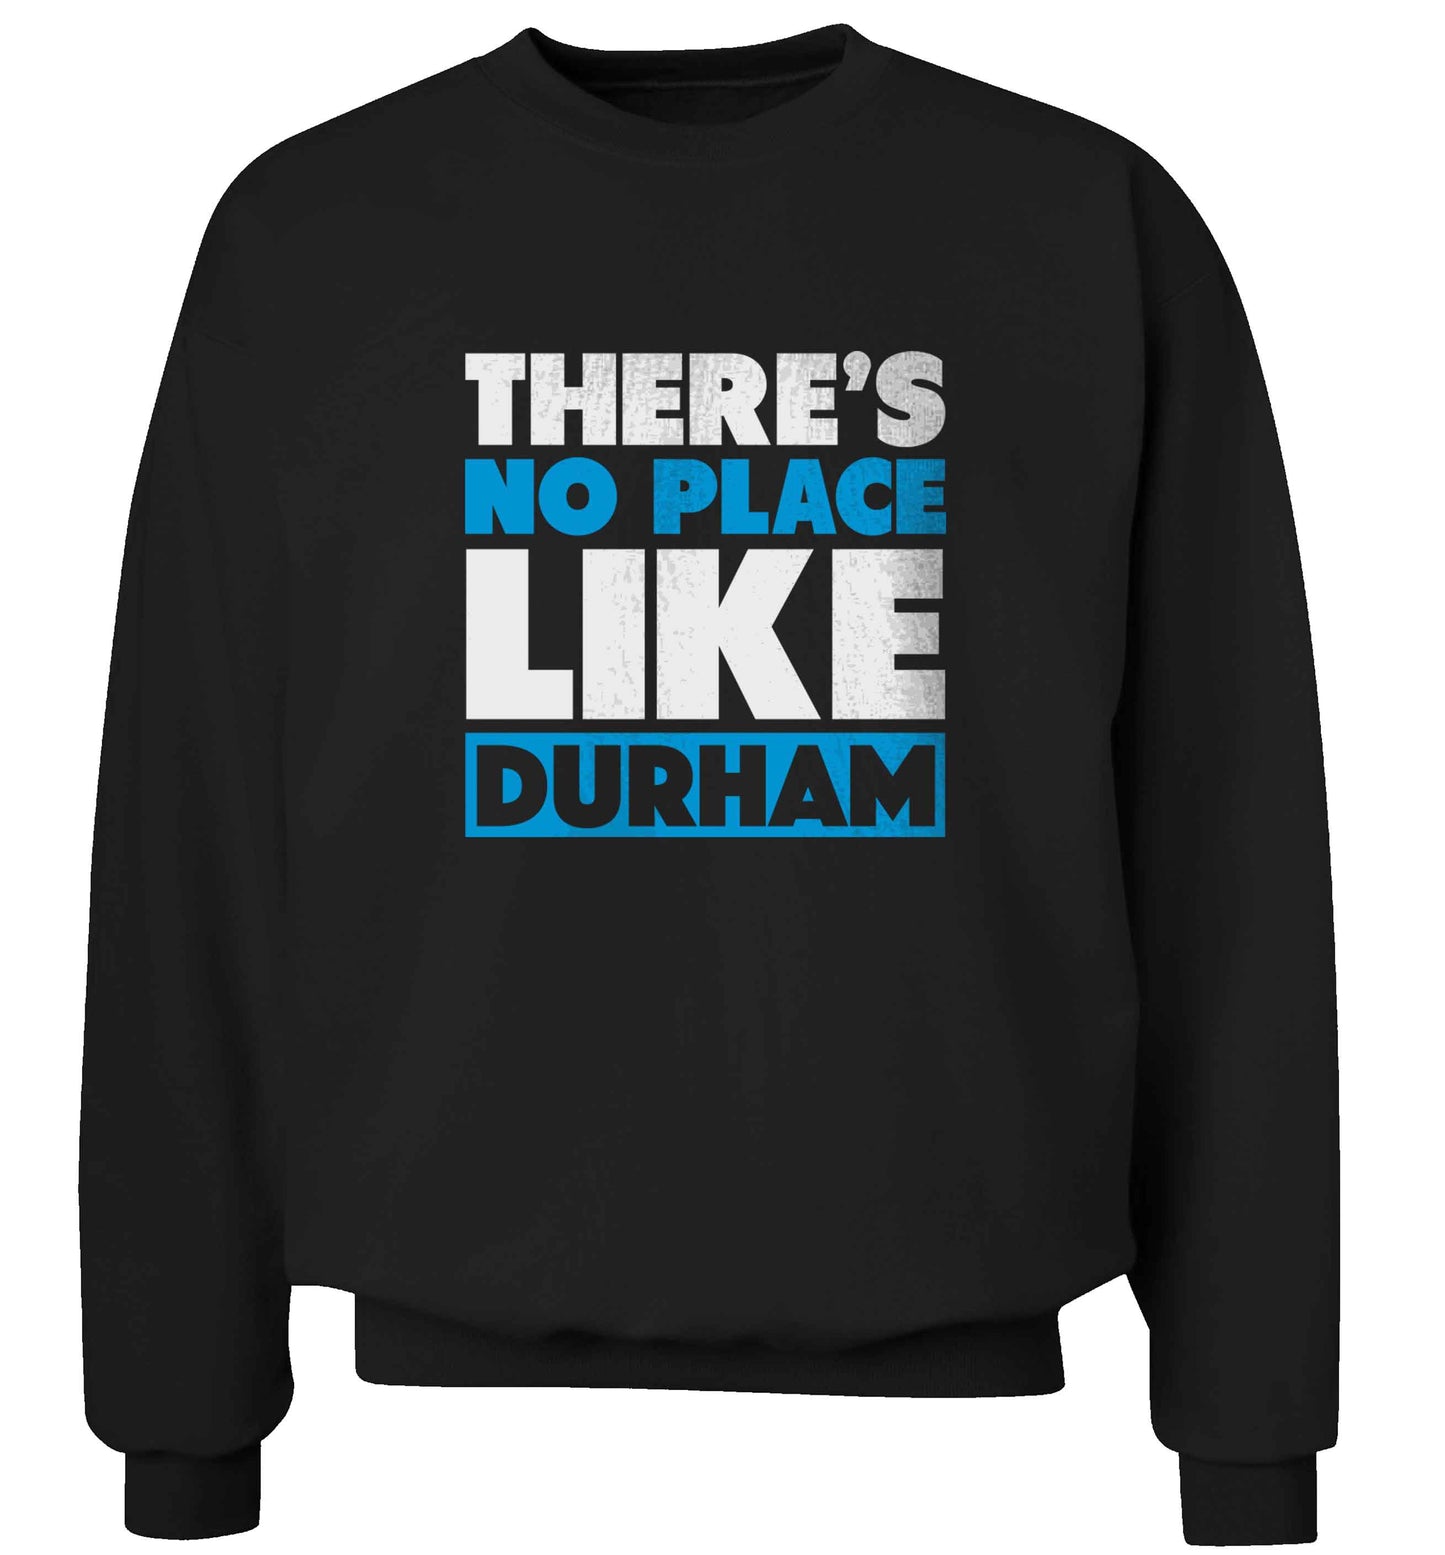 There's no place like Durham adult's unisex black sweater 2XL